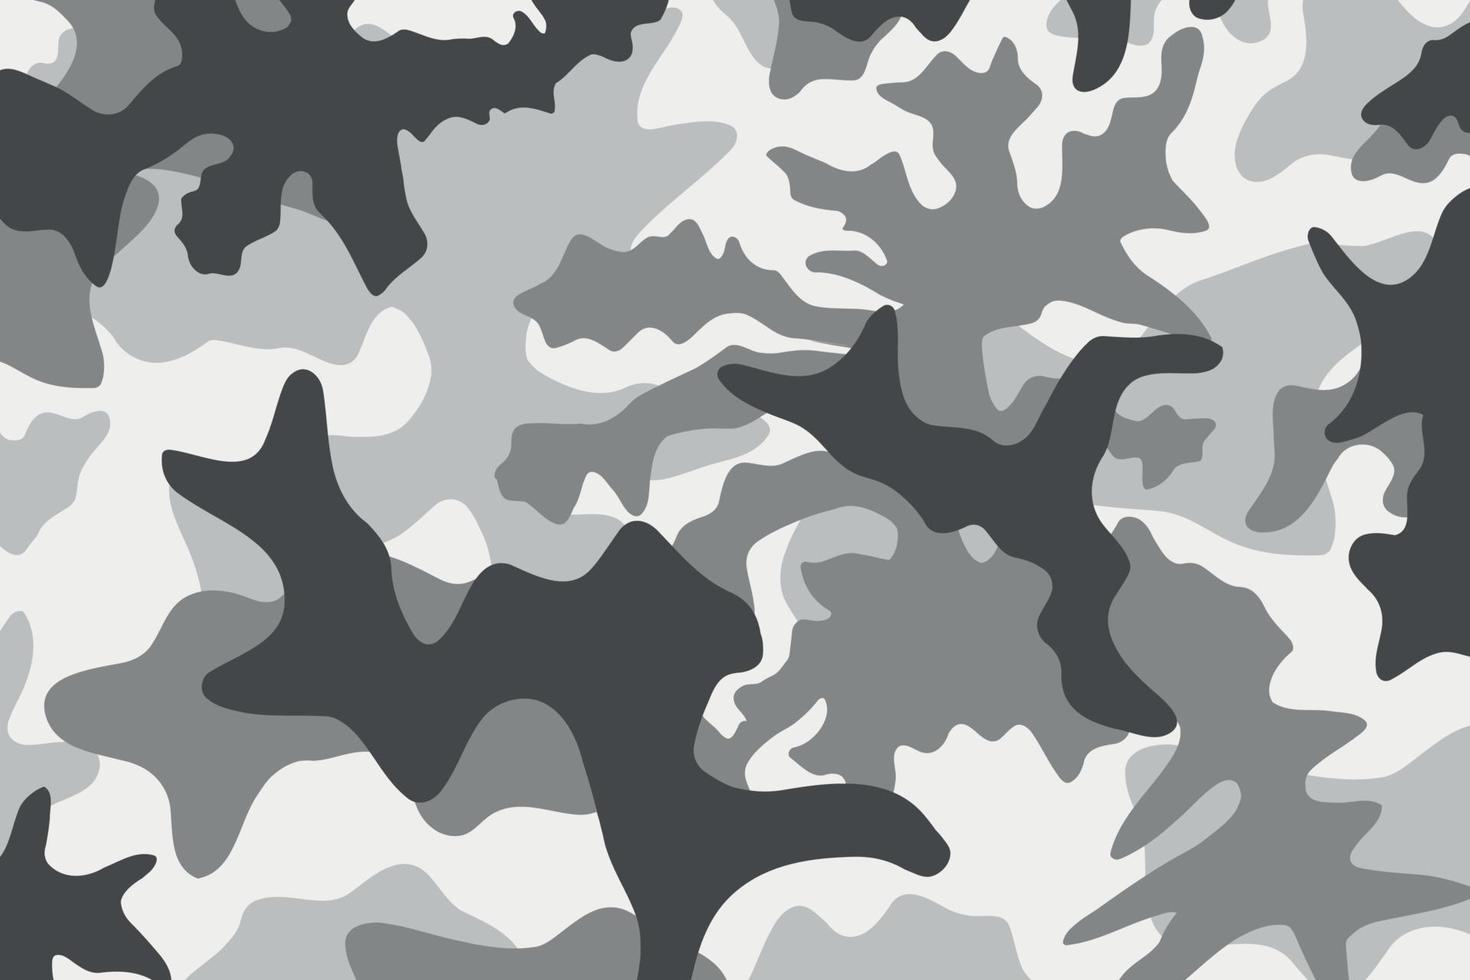 army stripes camouflage white gray winter snow urban city battlefield military wide background vector